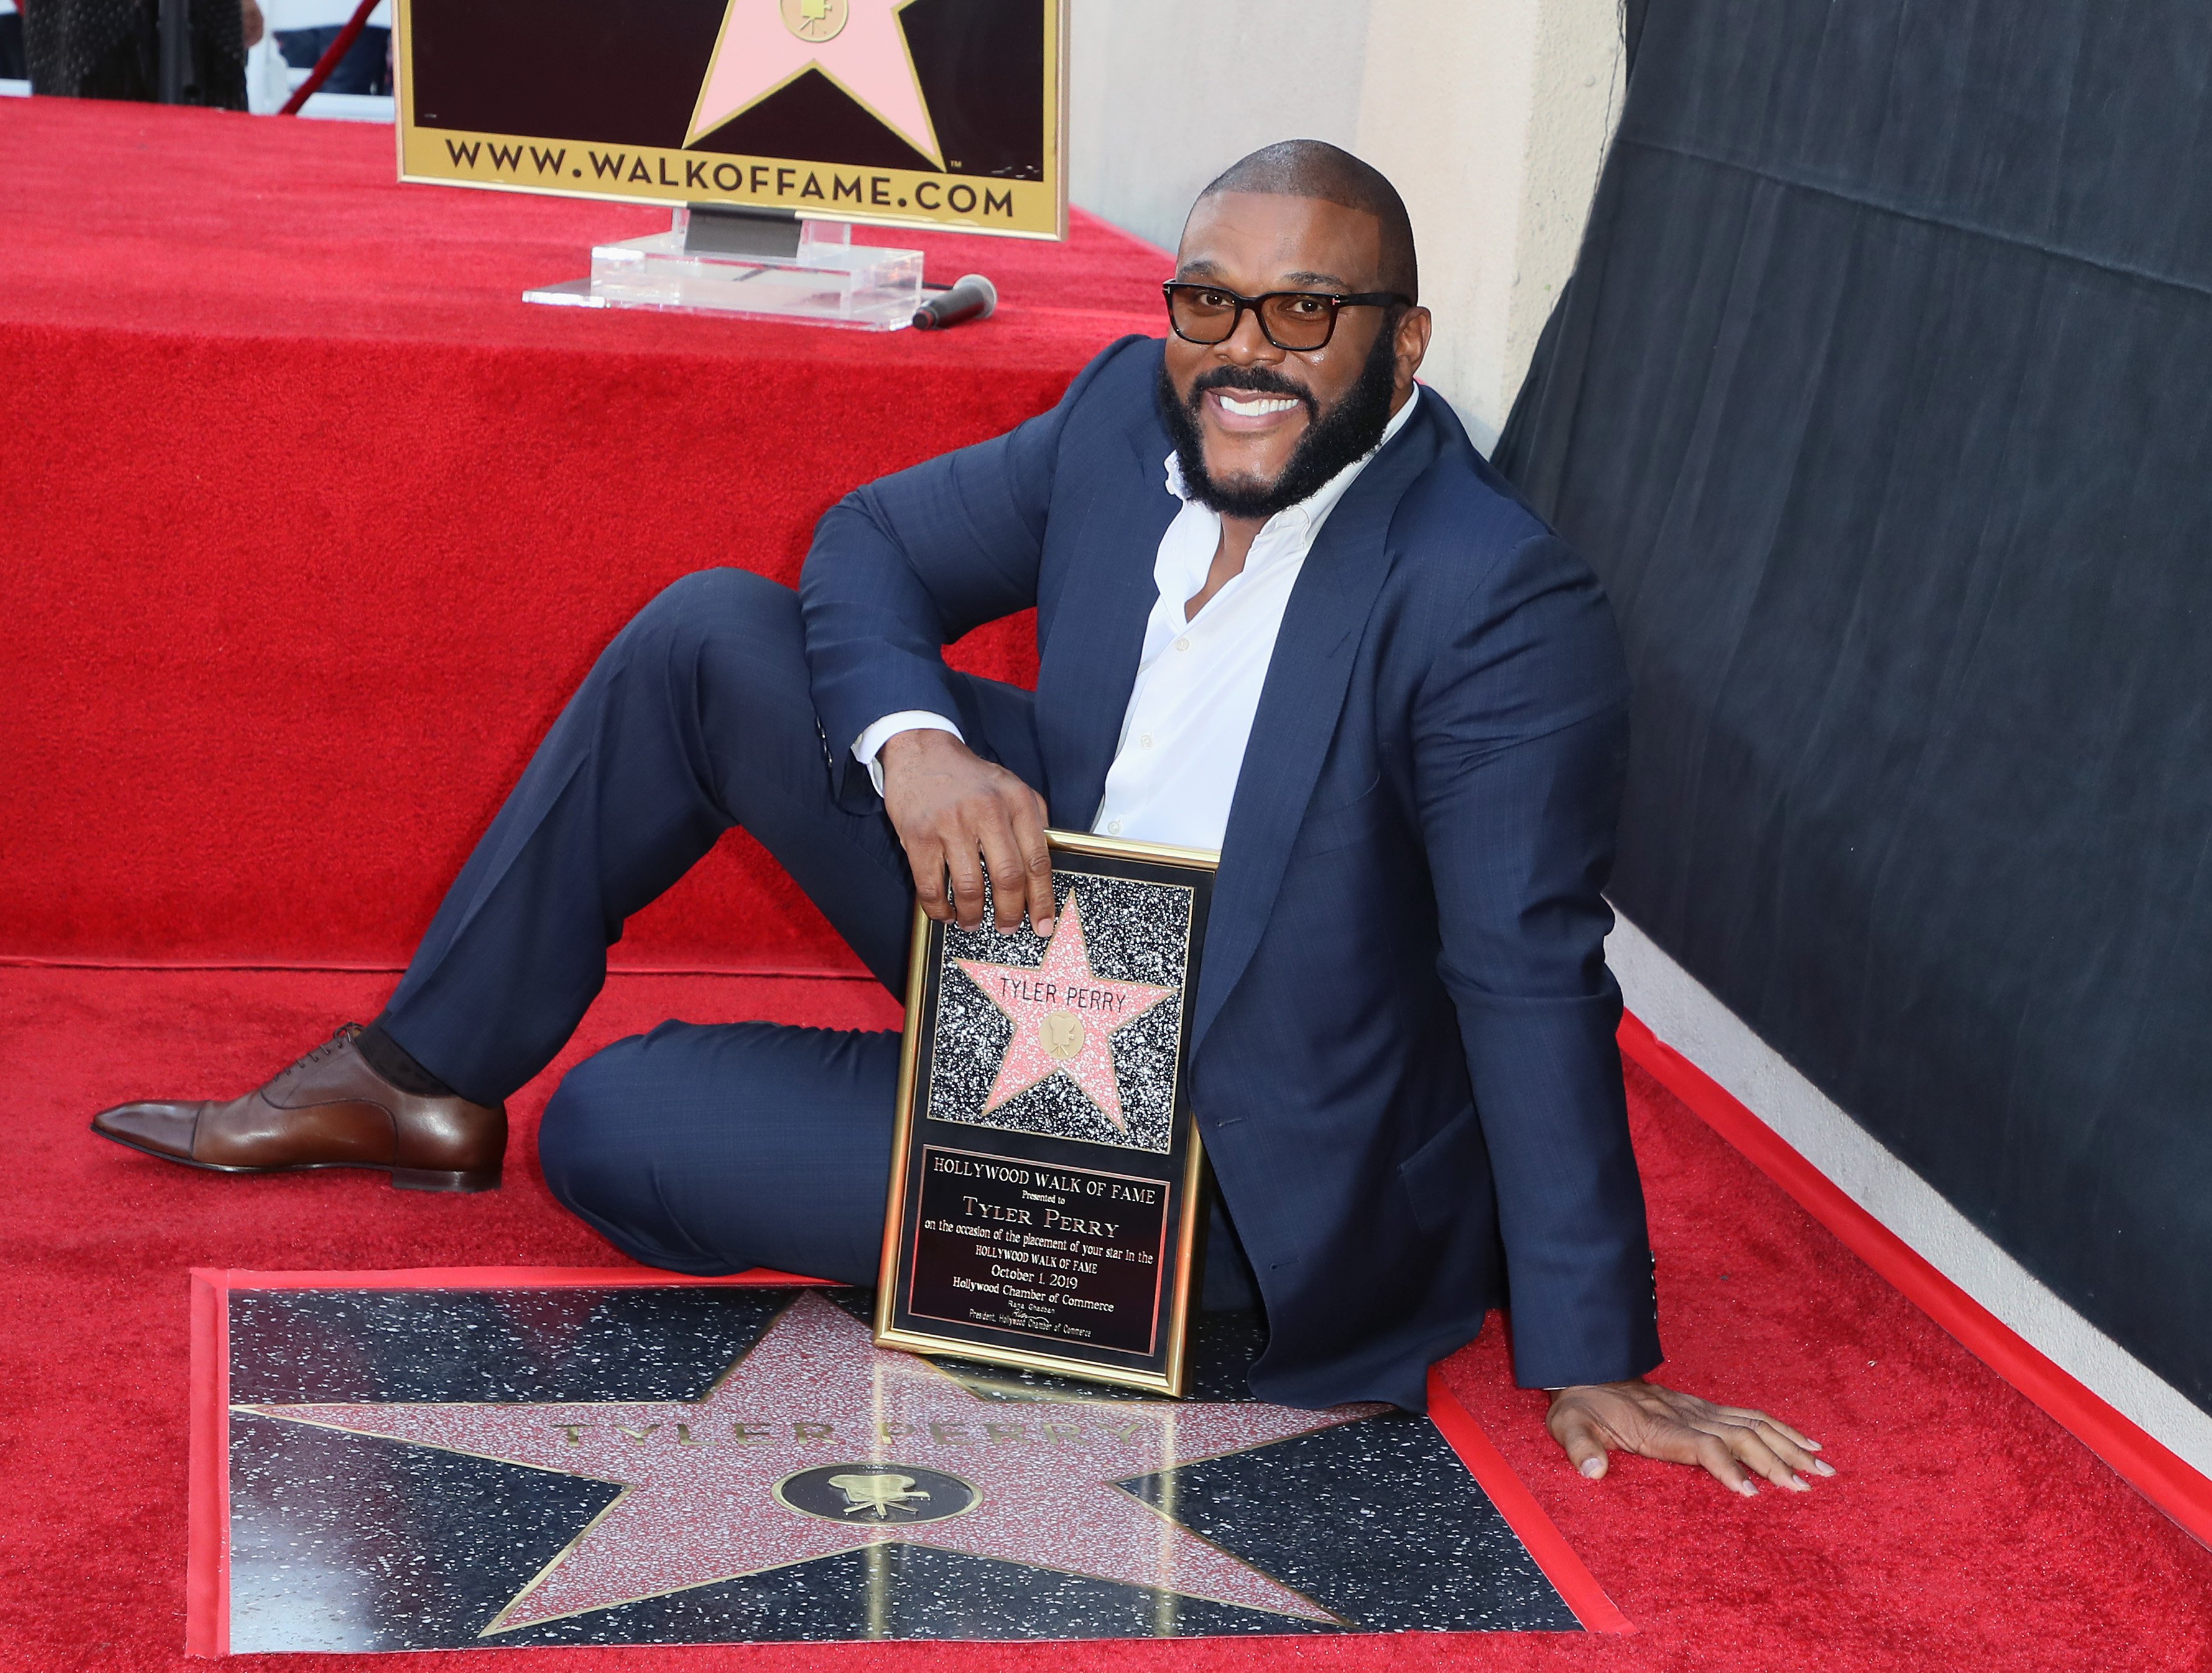 Tyler Perry poses with his award at the Star on the Hollywood Walk of Fame on October 1, 2019 in Hollywood, California. | Photo: Getty Images